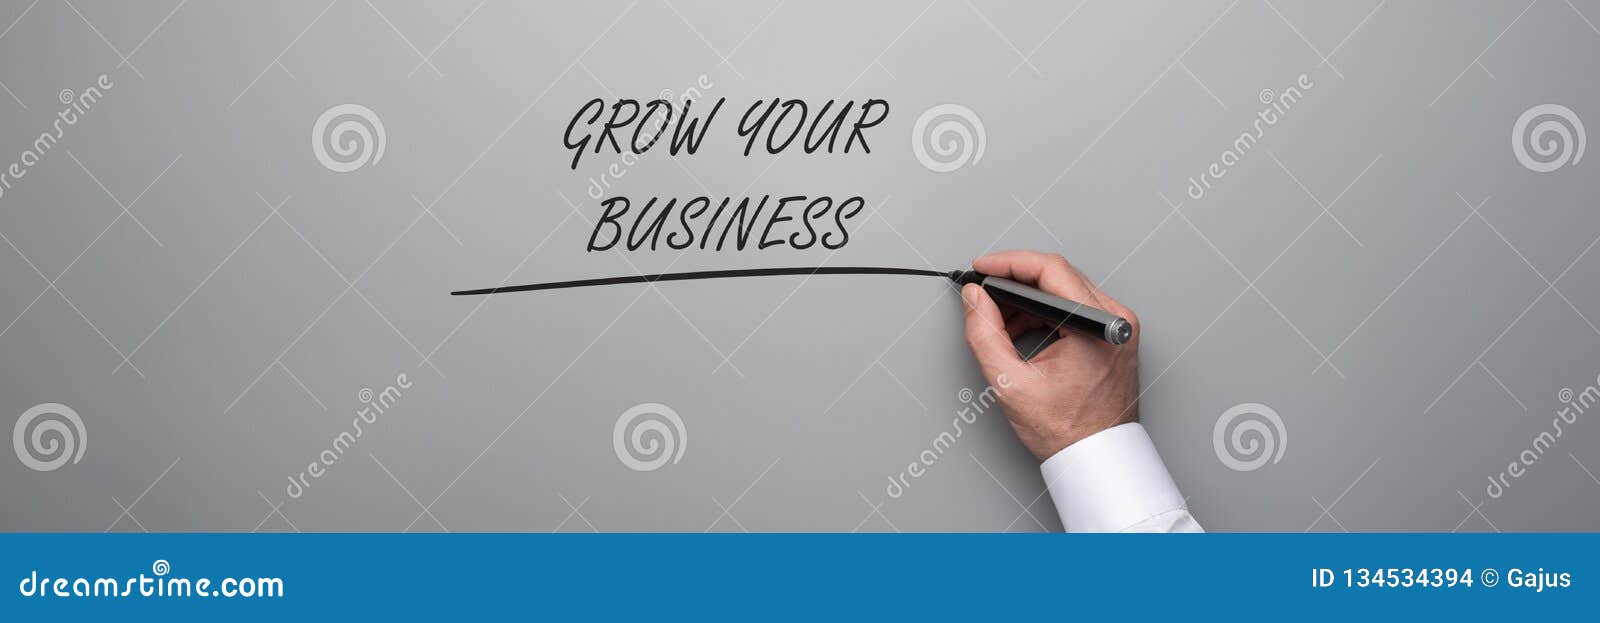 grow your business text